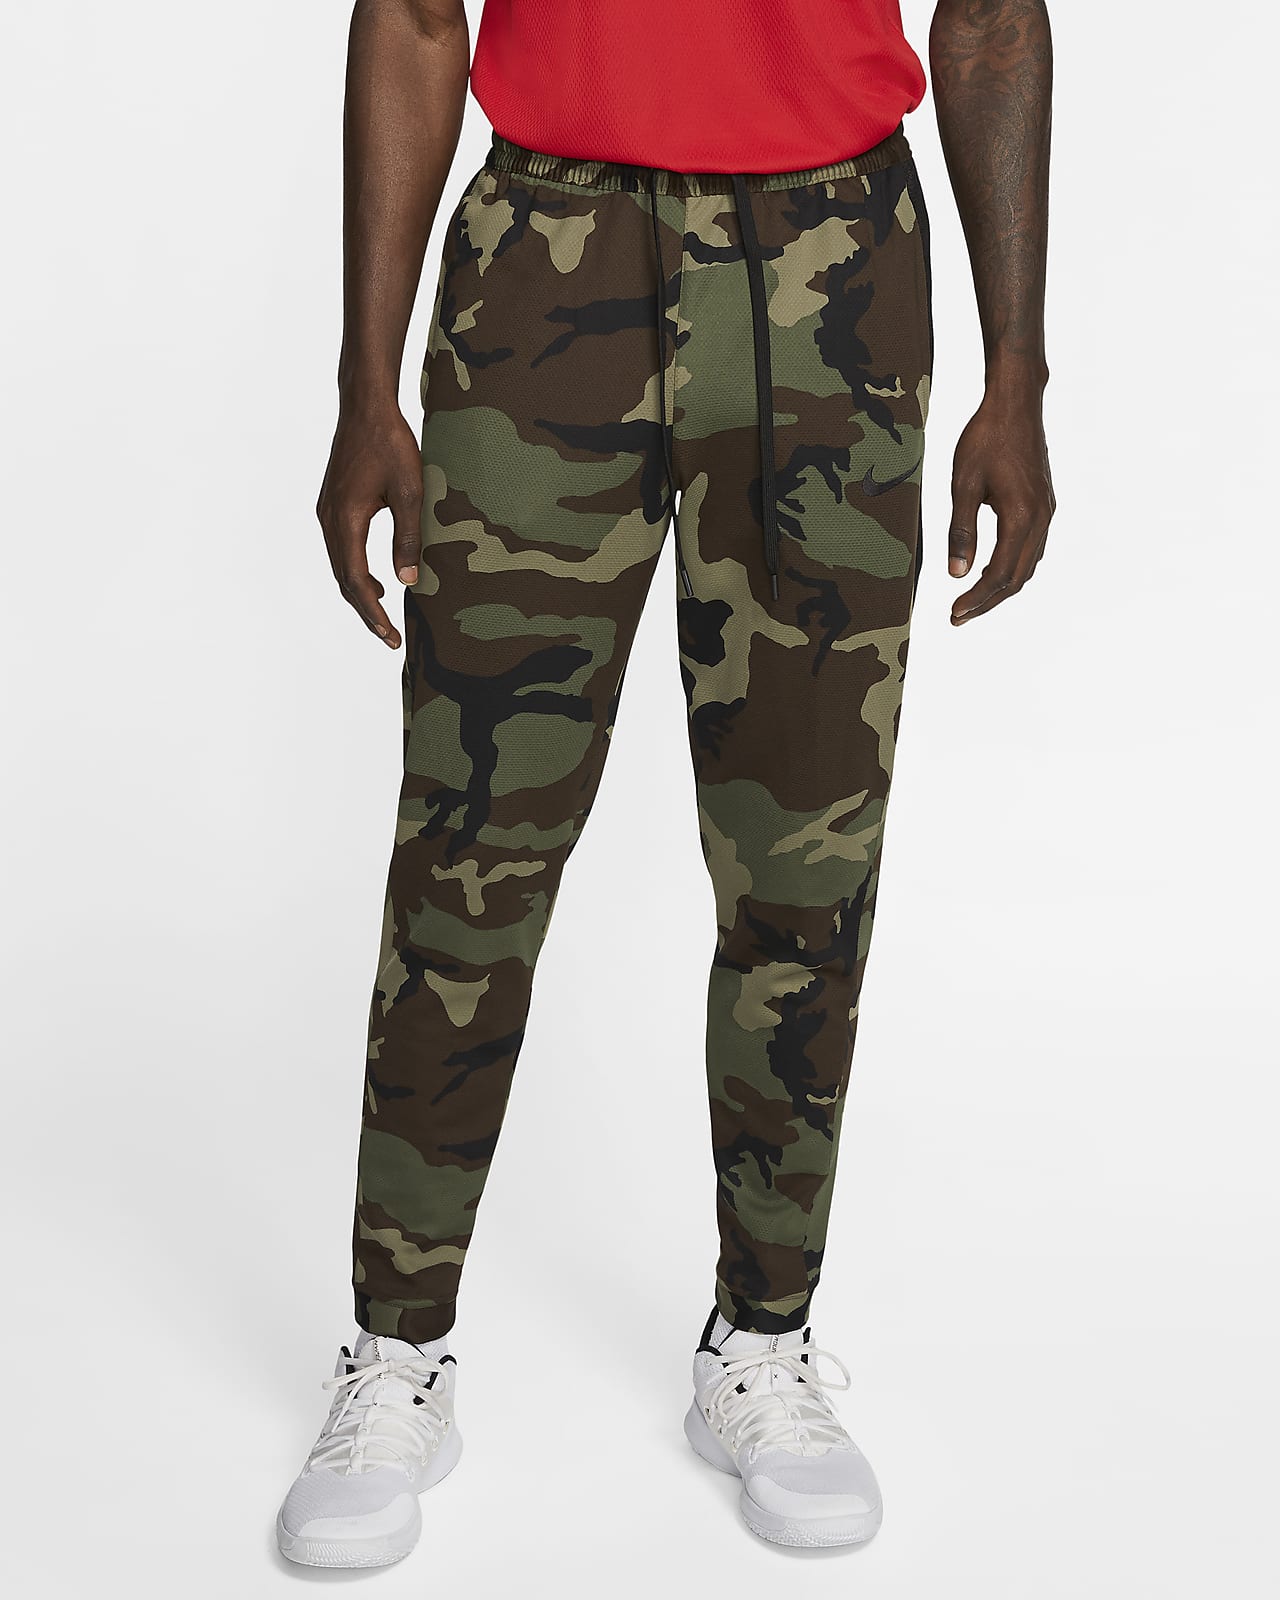 Nike Therma Flex Showtime Men's Basketball Printed Trousers